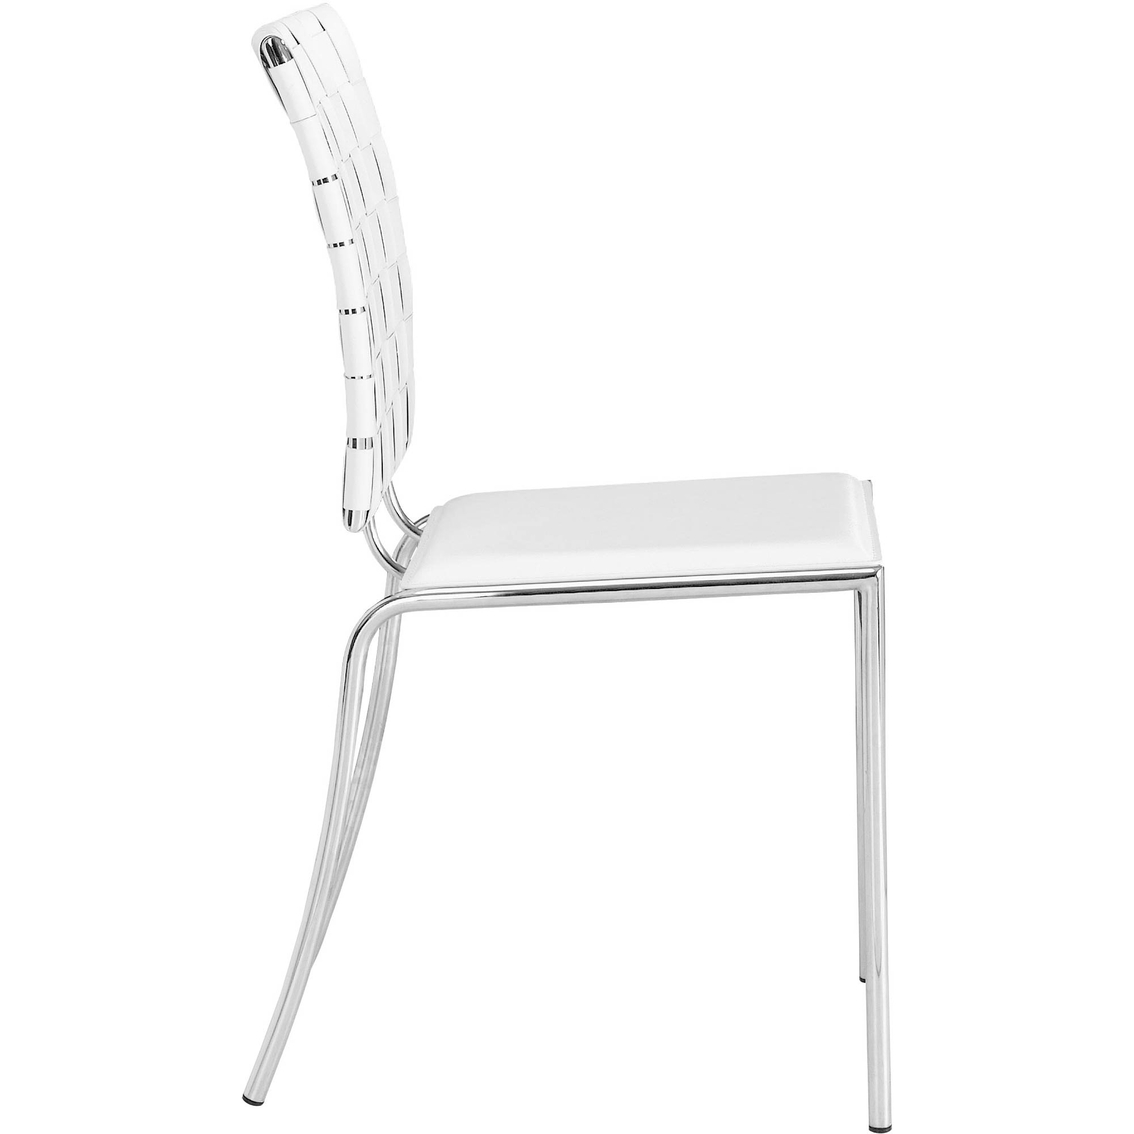 Zuo Criss Cross Dining Chair 4 Pk. - Image 2 of 9